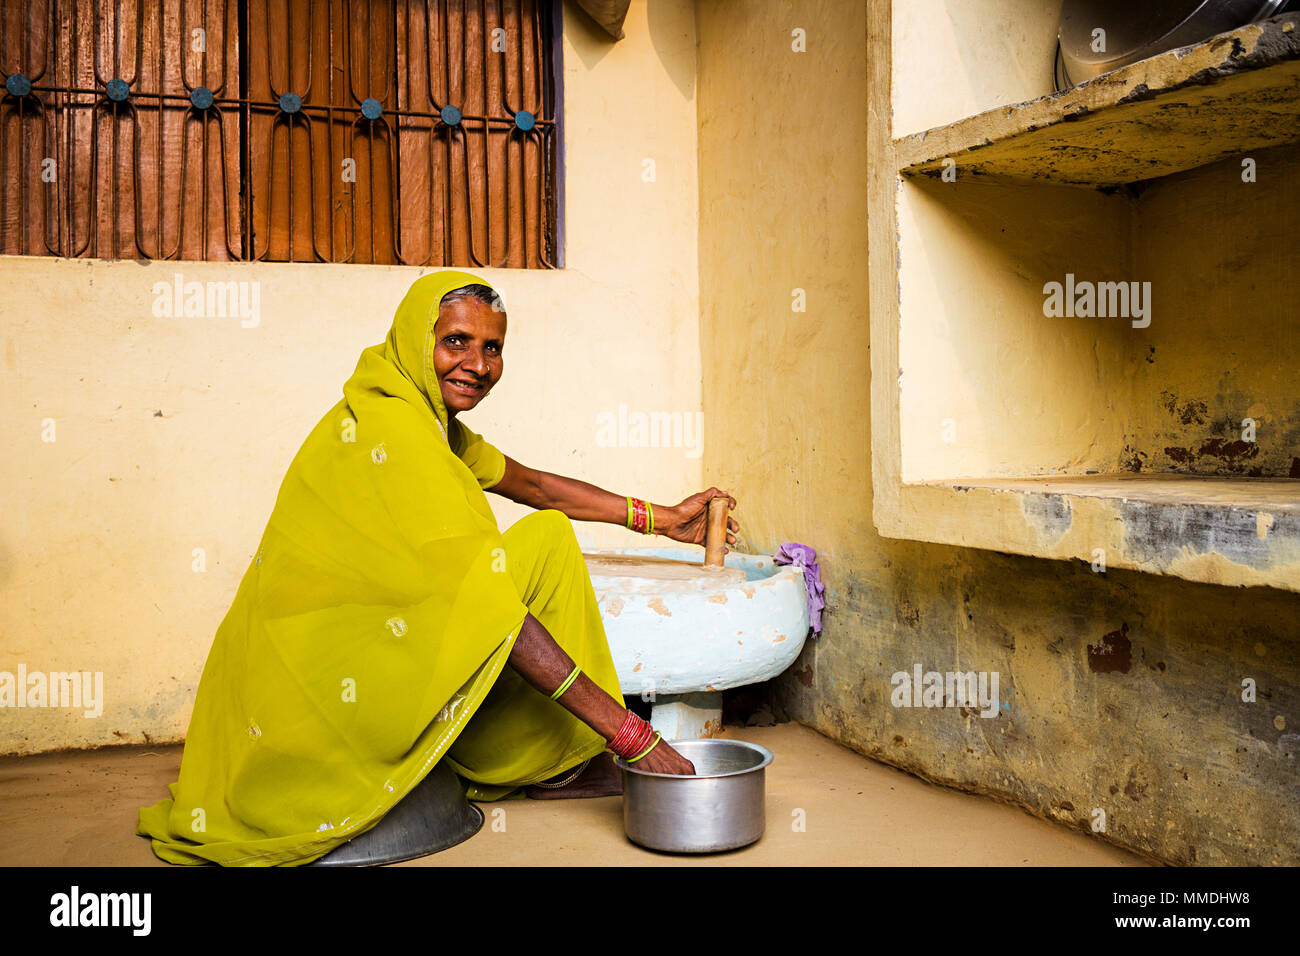 One Rural Old Female Grinding Wheat with hand mill At-Home Village Stock Photo